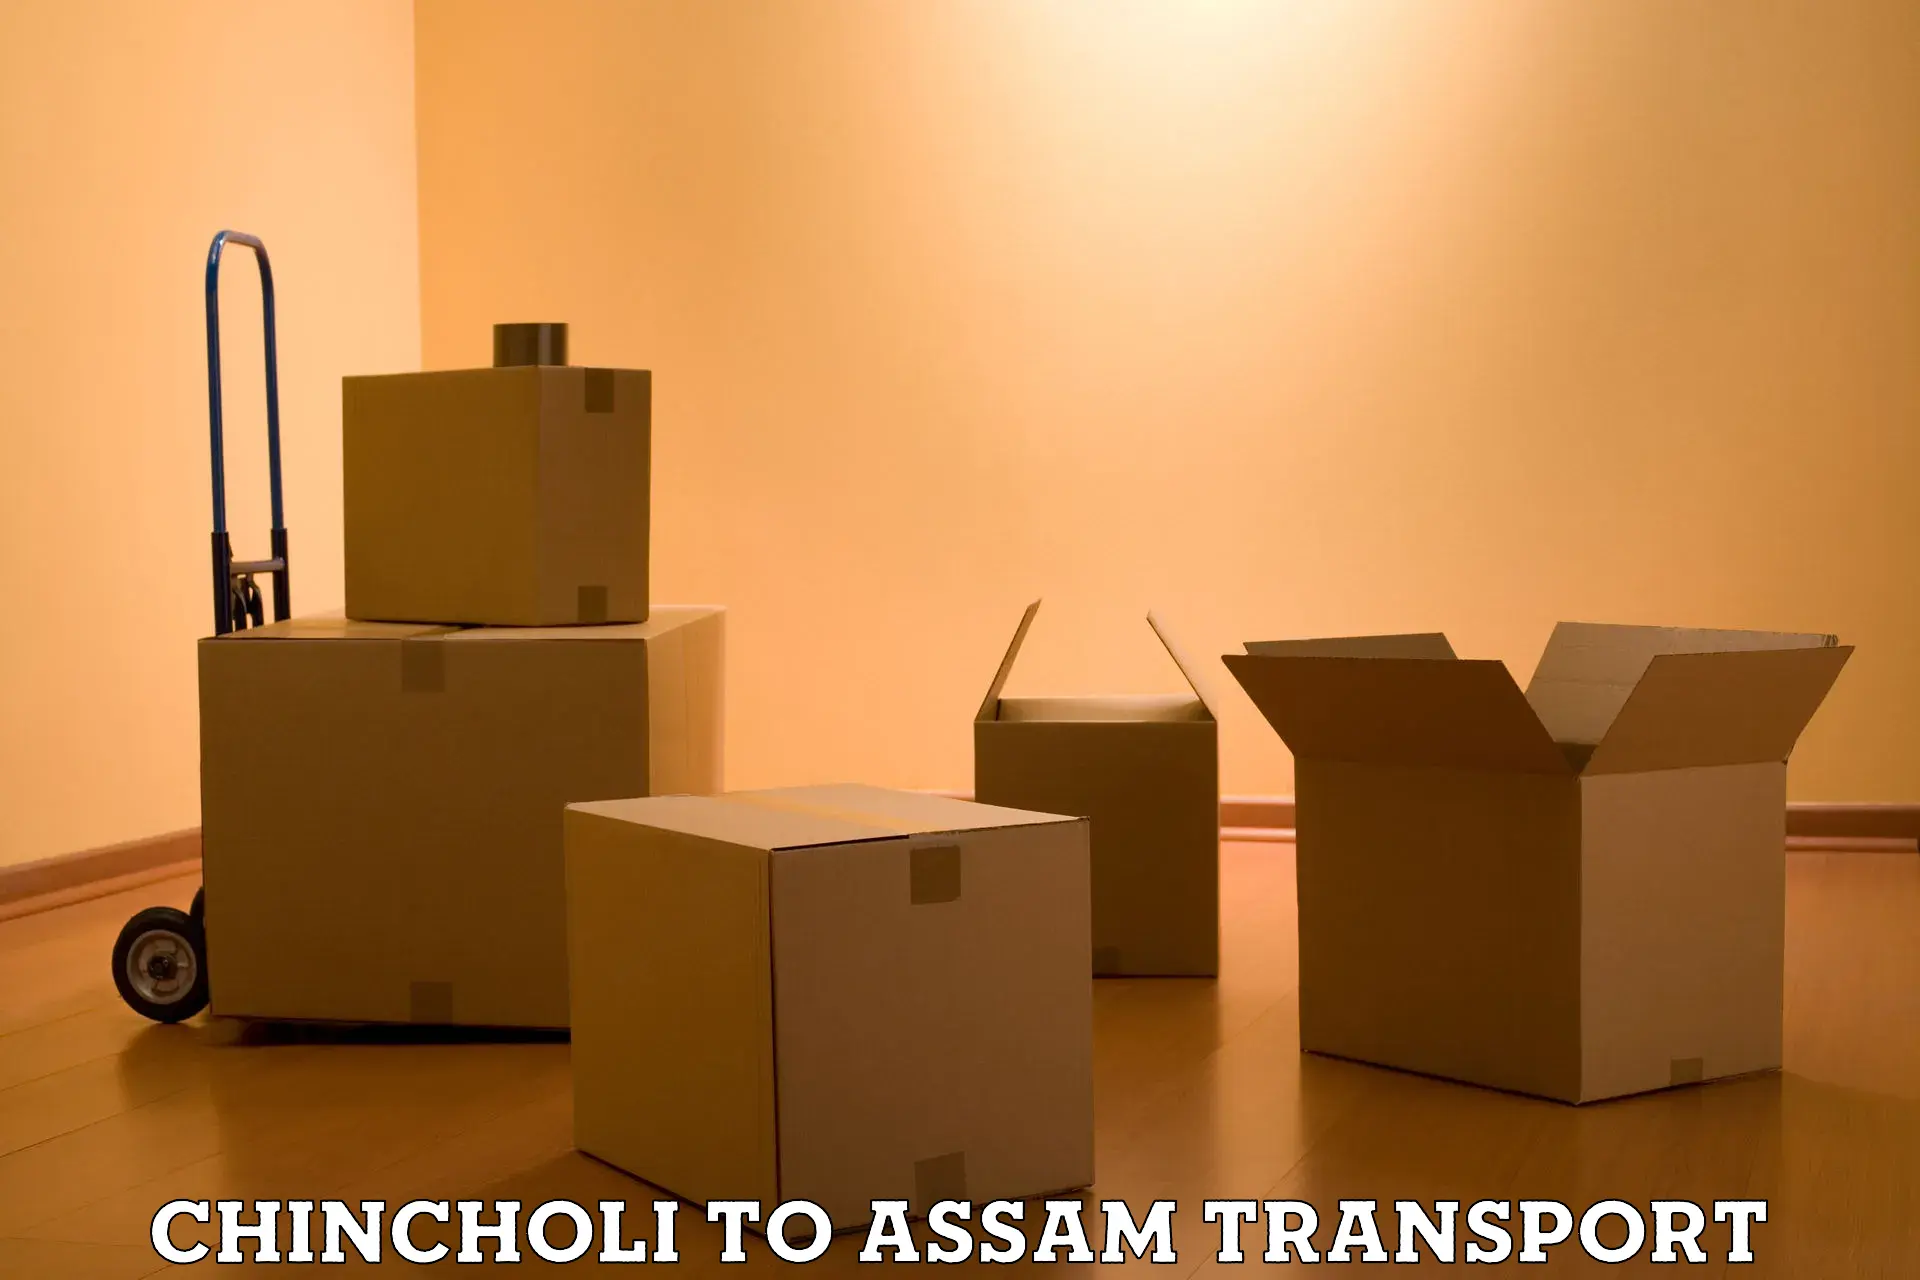 Commercial transport service Chincholi to Lala Assam